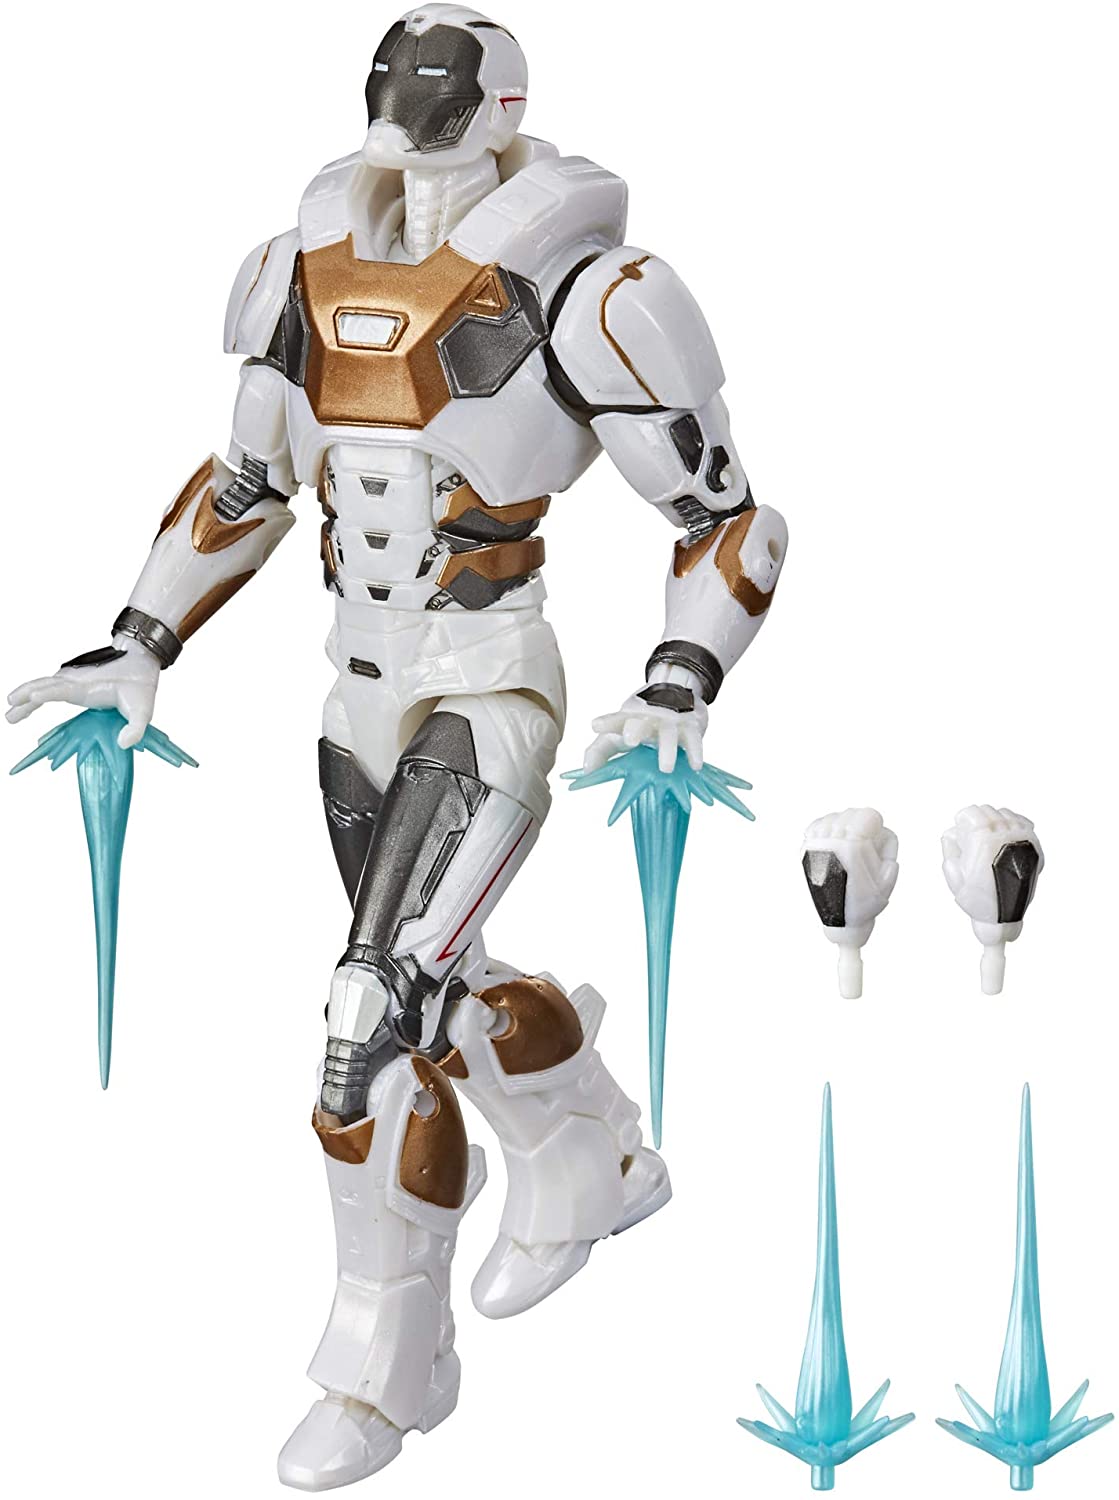 Hasbro Marvel Legends Series 6-inch Collectible Action Figure Toy Gamerverse Marvel’s Avengers Starboost Armor Iron Man, 6 Accessories